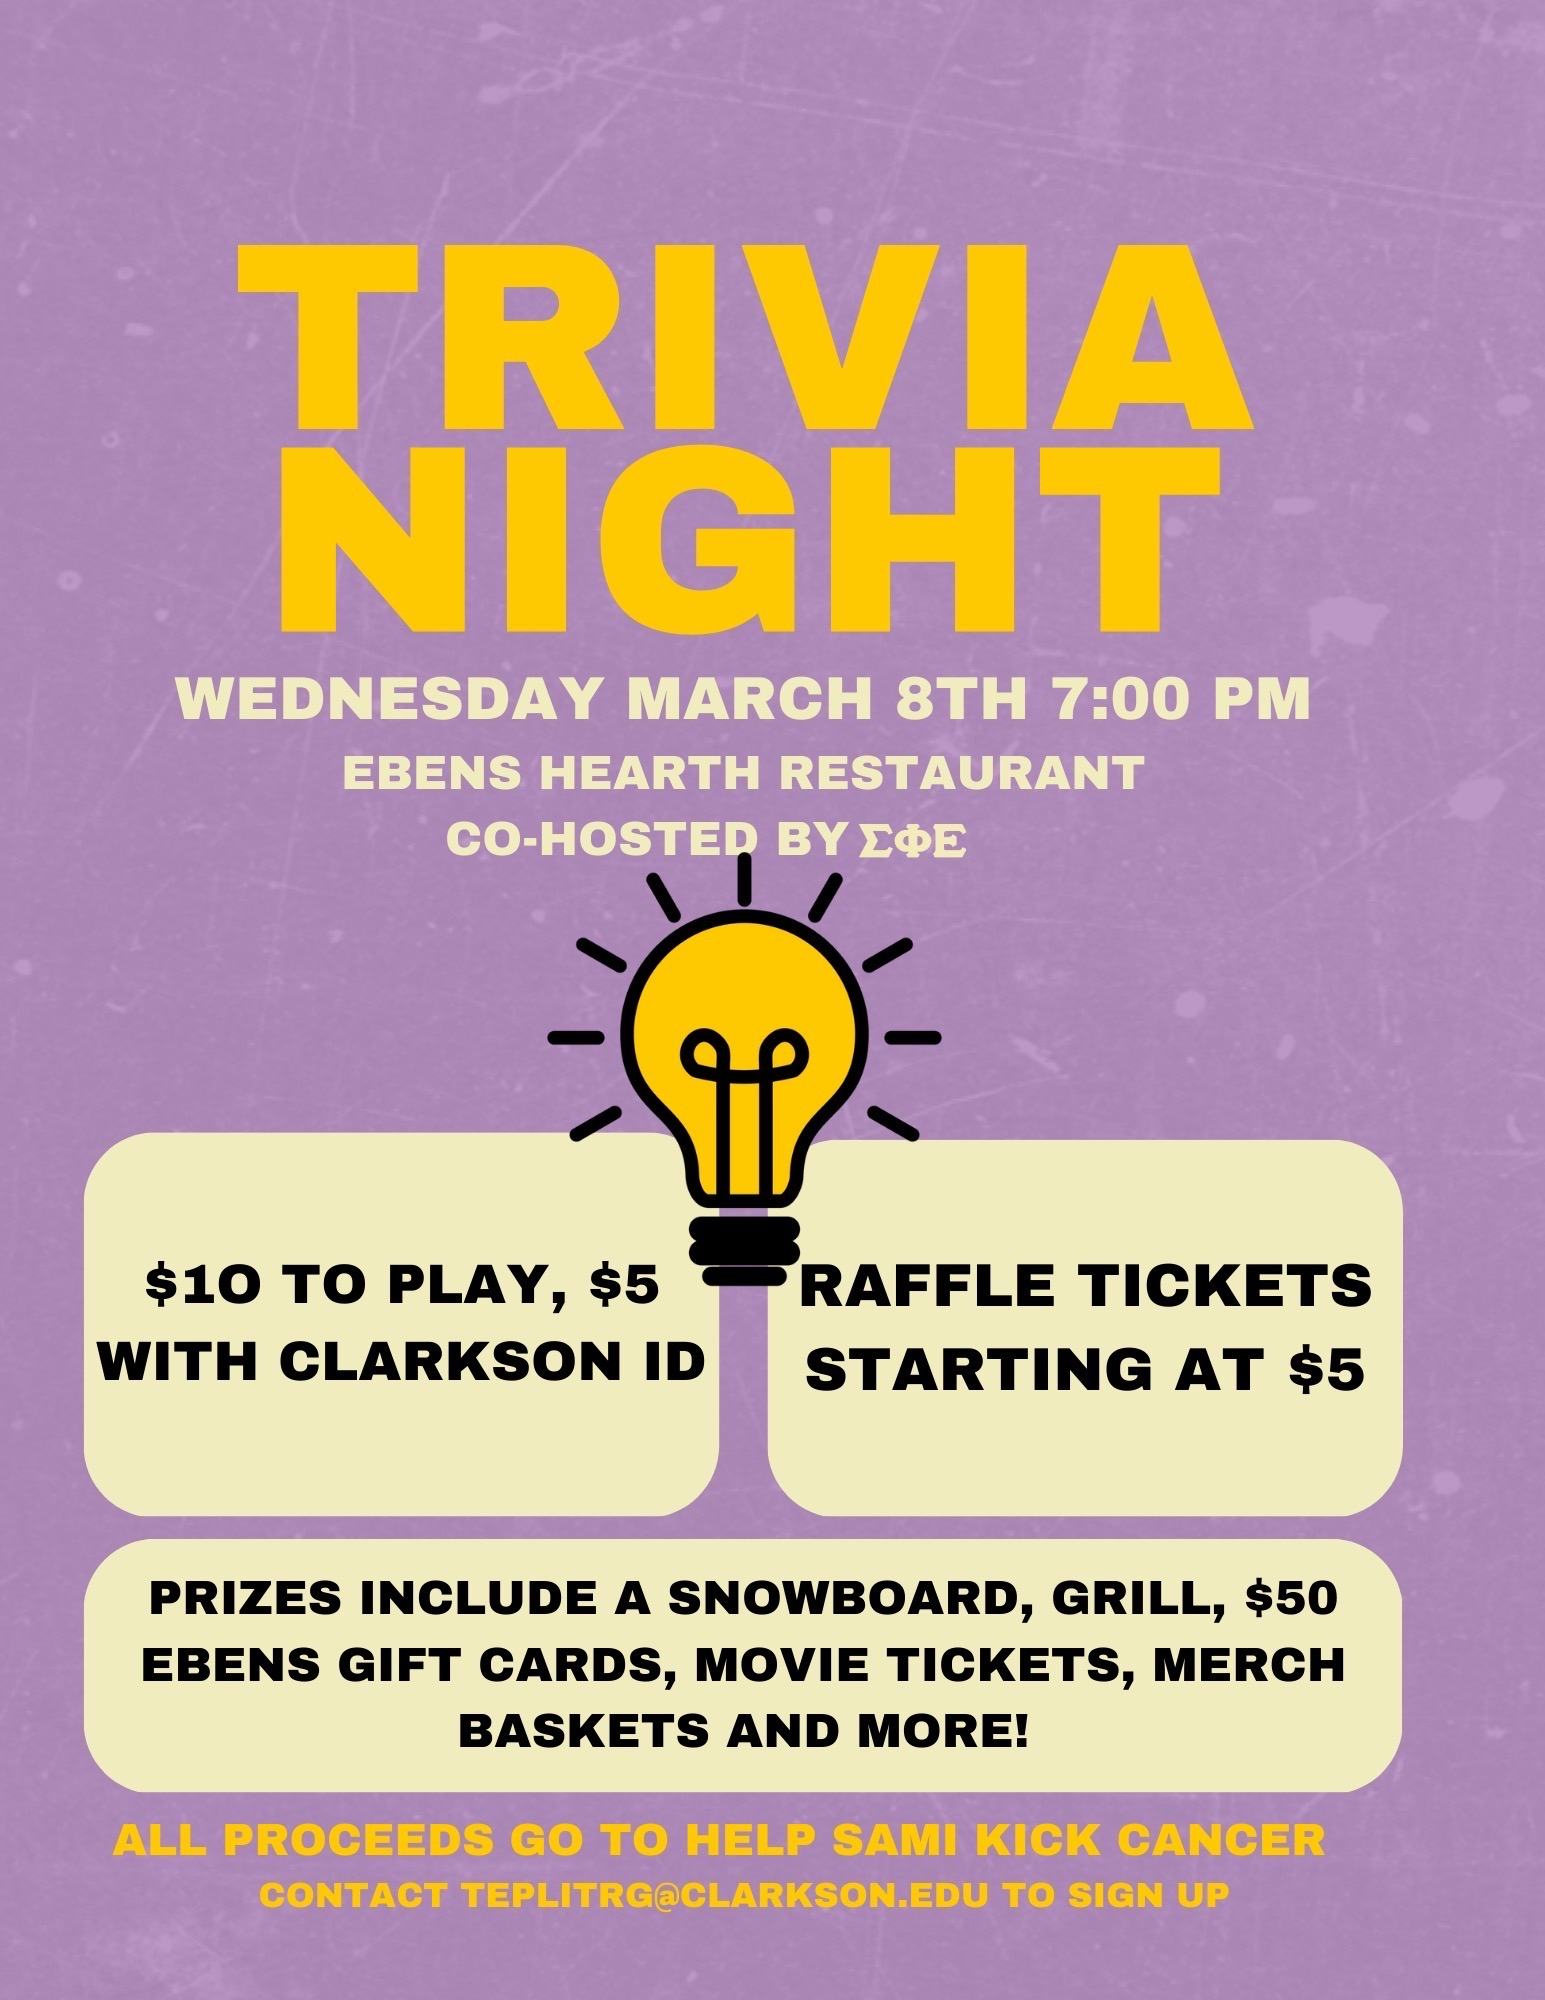 Trivia Night will be taking place on Wednesday, March 8, 2023 at 7:00 pm. We will meet at Ebens Hearth Restaurant and it’s co-hosted by the Sami Kick Cancer Foundation and Sigma Phi Epsilon. A lit lightbulb is located in the middle of the flier. It will cost $10 to play trivia and $5 to play trivia with a Clarkson ID. Raffle tickets start at $5. Prizes include a snowboard, grill, $50 Ebens gift cards, movie tickets, merchandise baskets, and more. All proceeds will go directly to the Sami Kick Cancer Foundation. The contact to sign up for trivia is teplitrg@clarkson.edu.